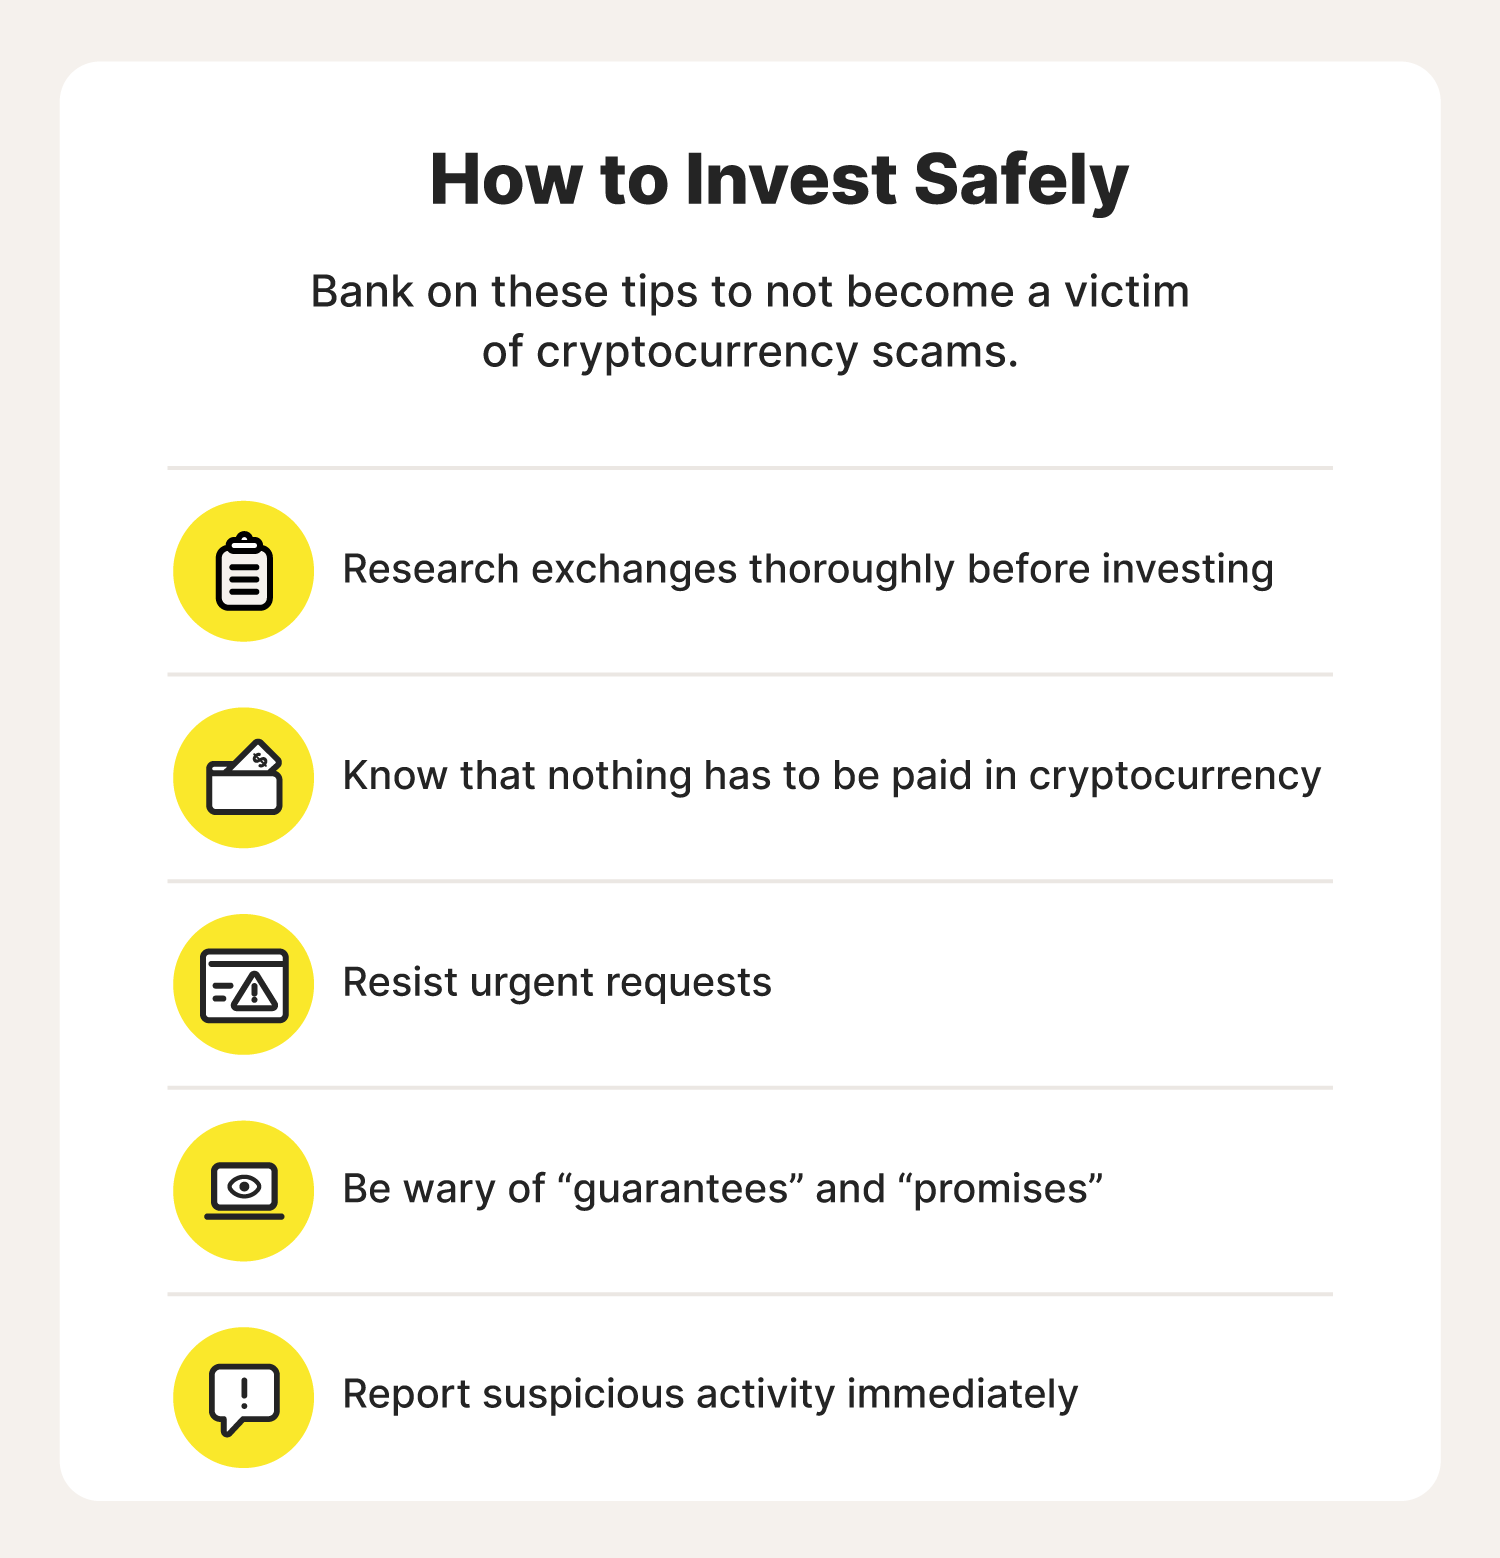 Illustrated chart with icons and text describing how to invest in cryptocurrency safely.